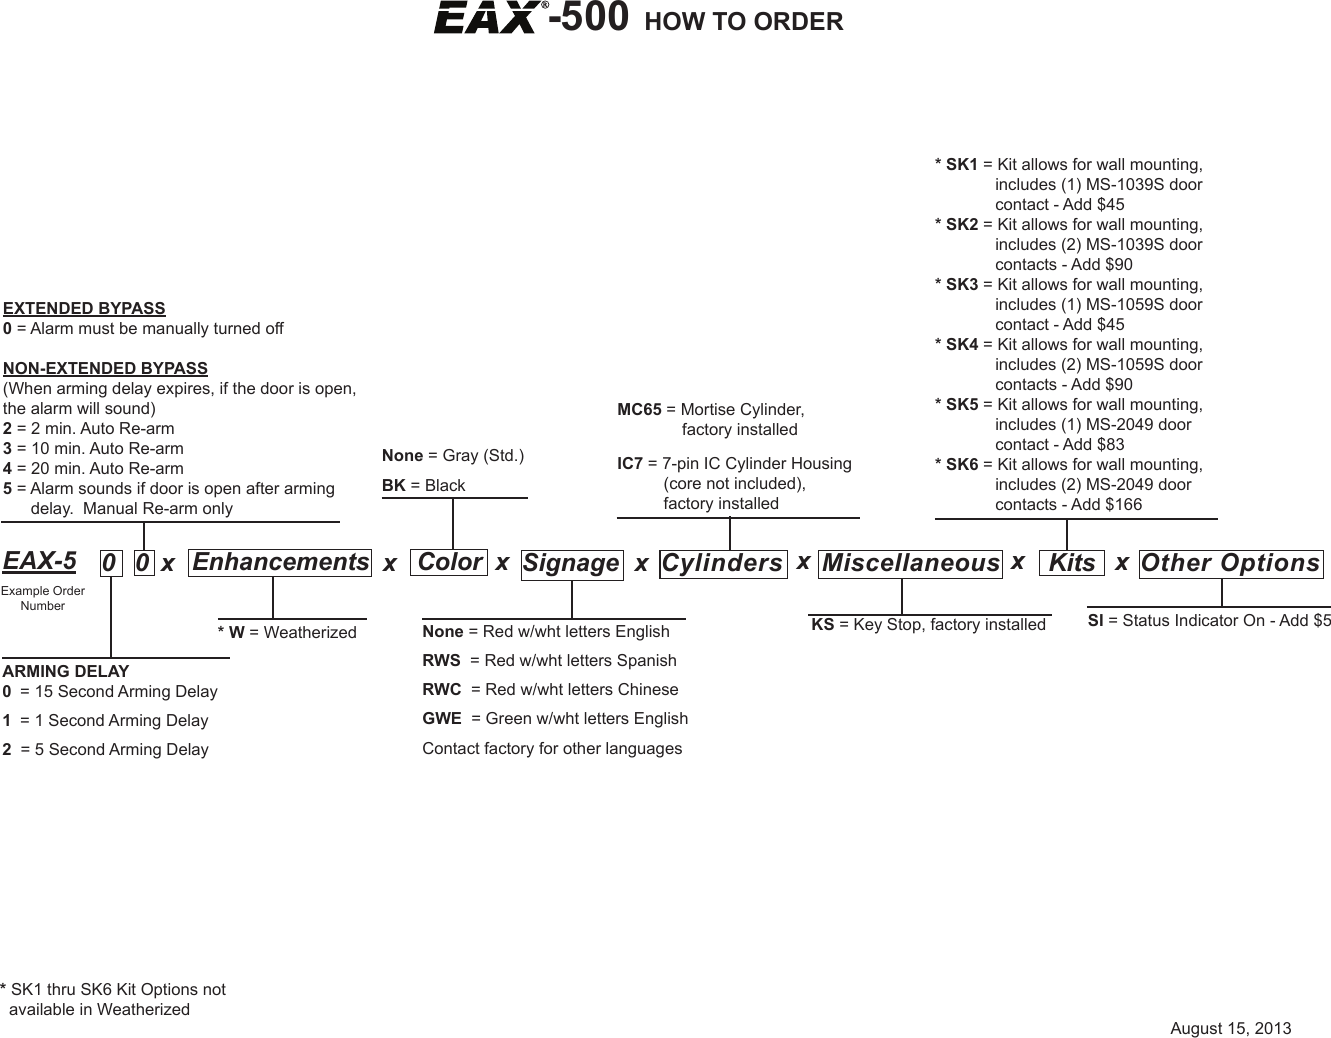 Page 1 of 1 - Detex  EAX-500 How To Order Guide EAX-500Howto Order7-2-12